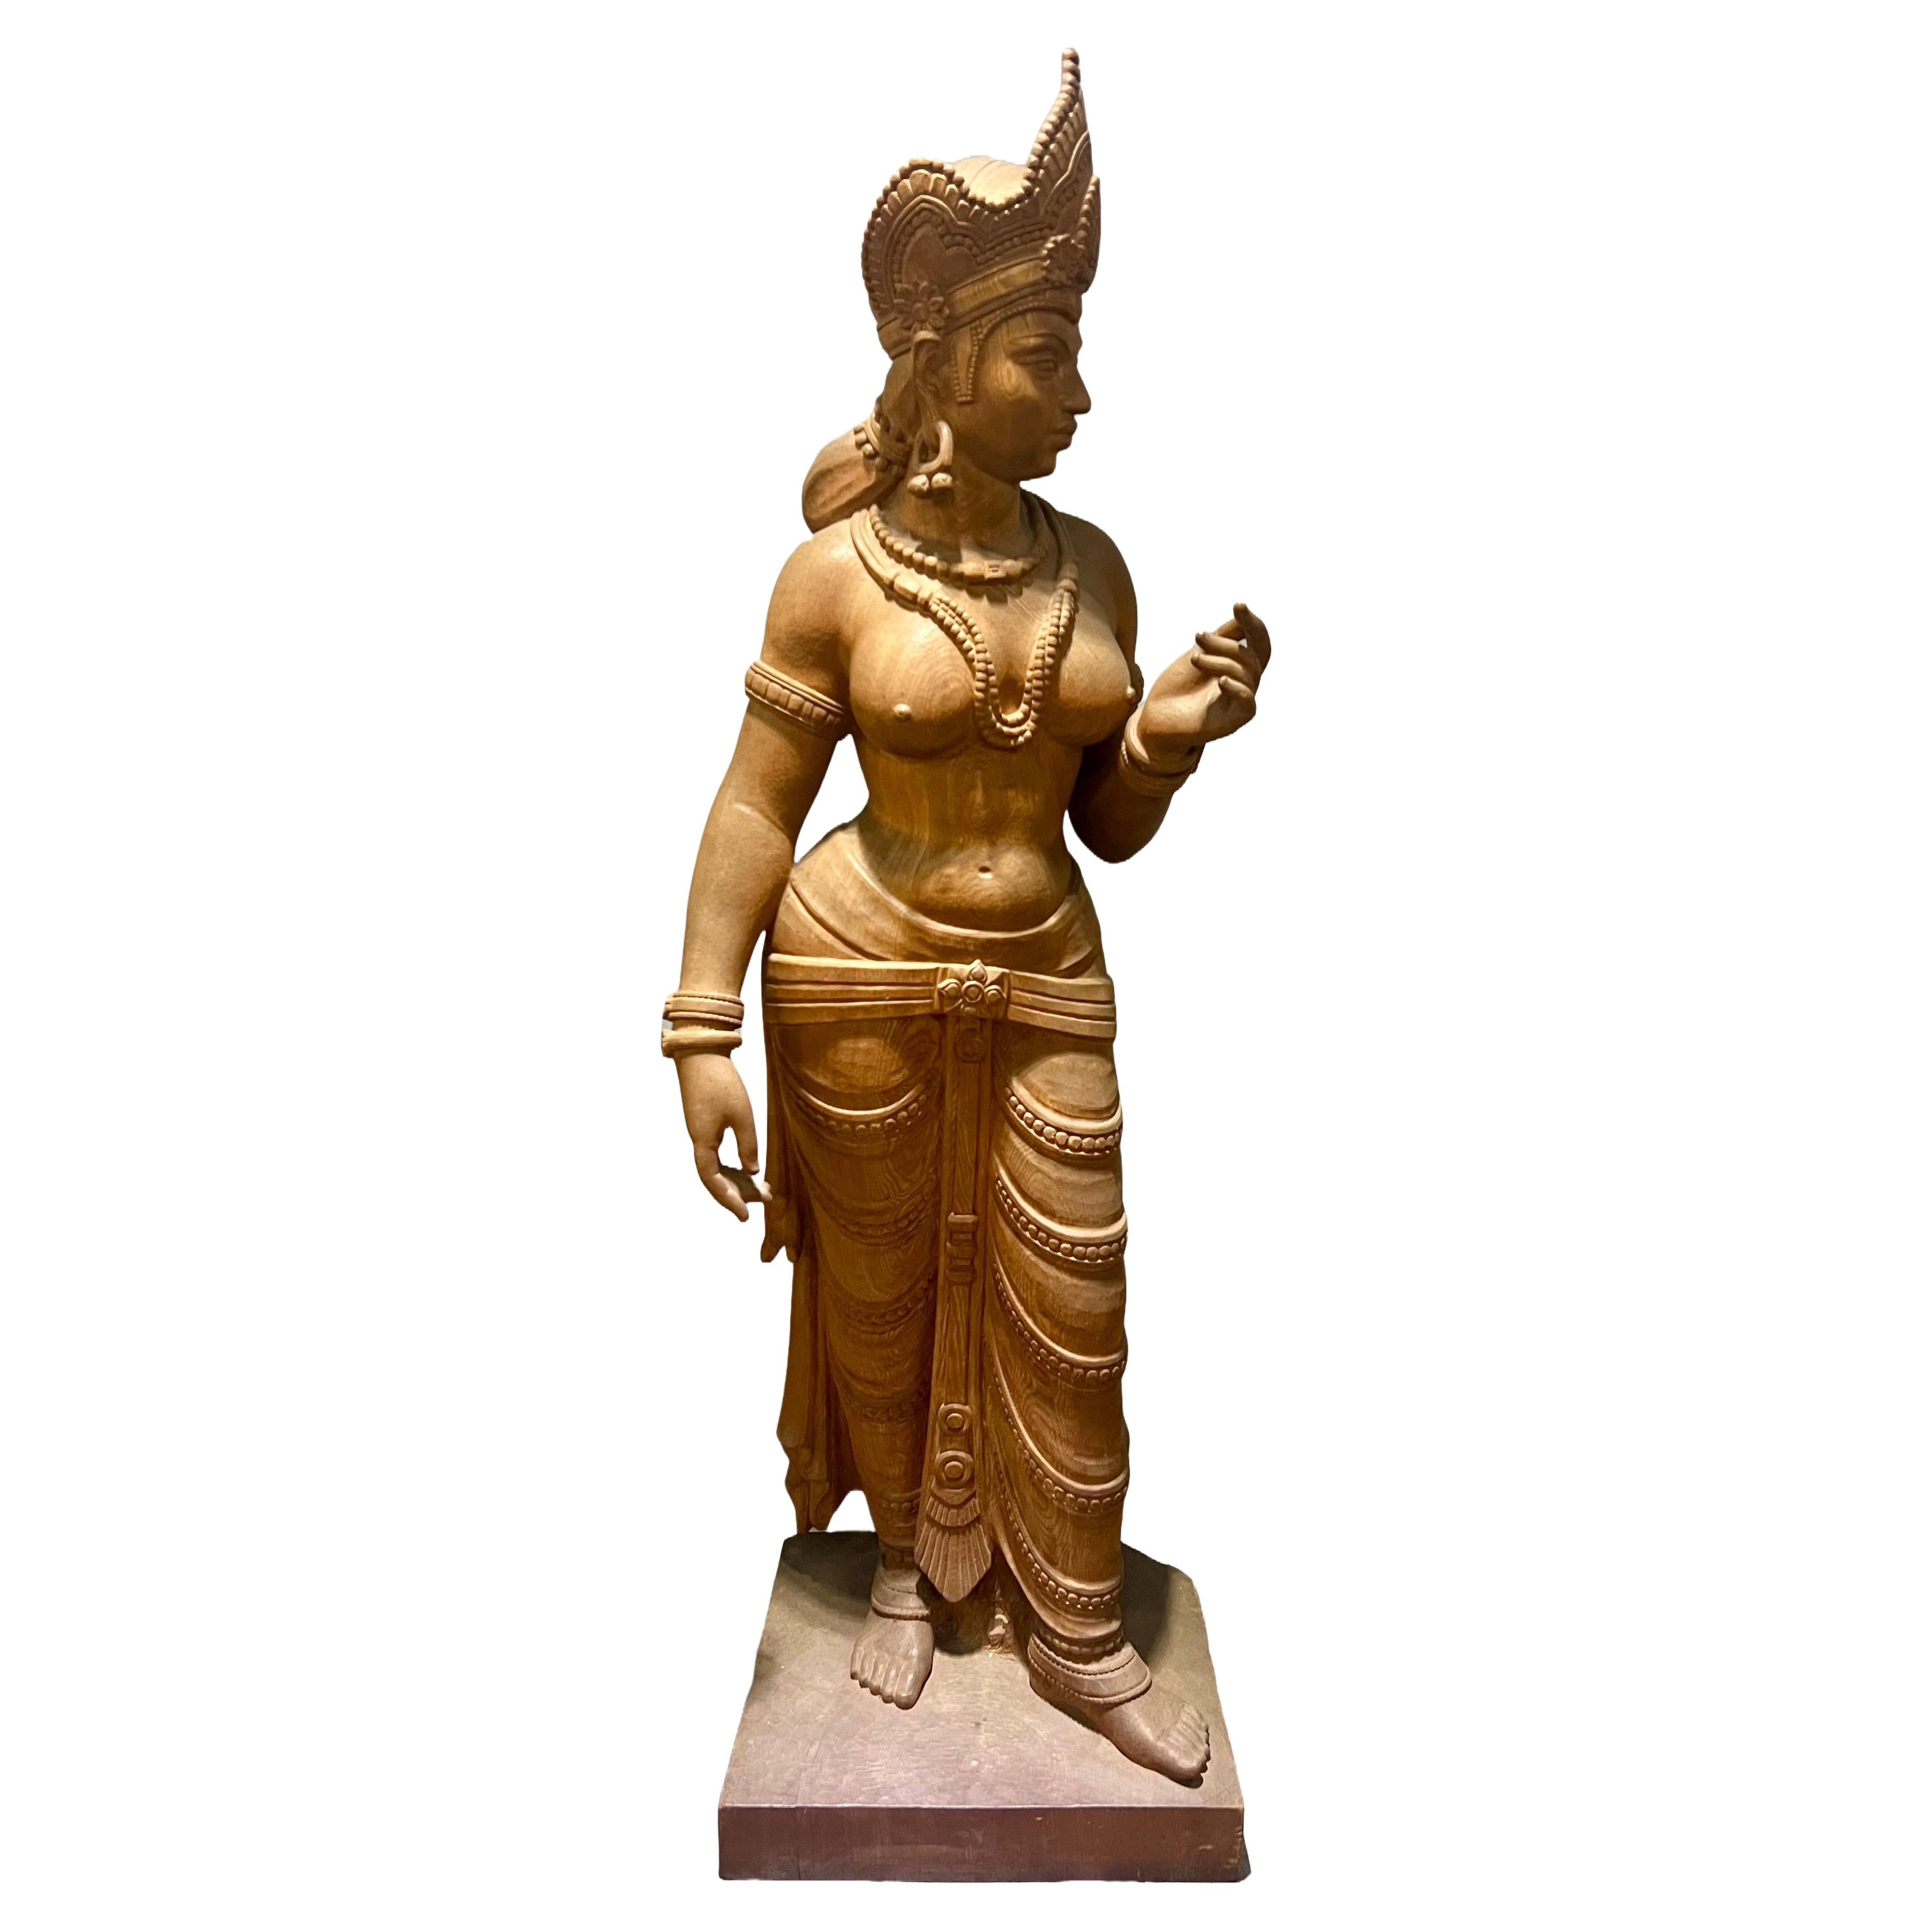 A life-size carved wood sculpture of the Hindu goddess Parvati